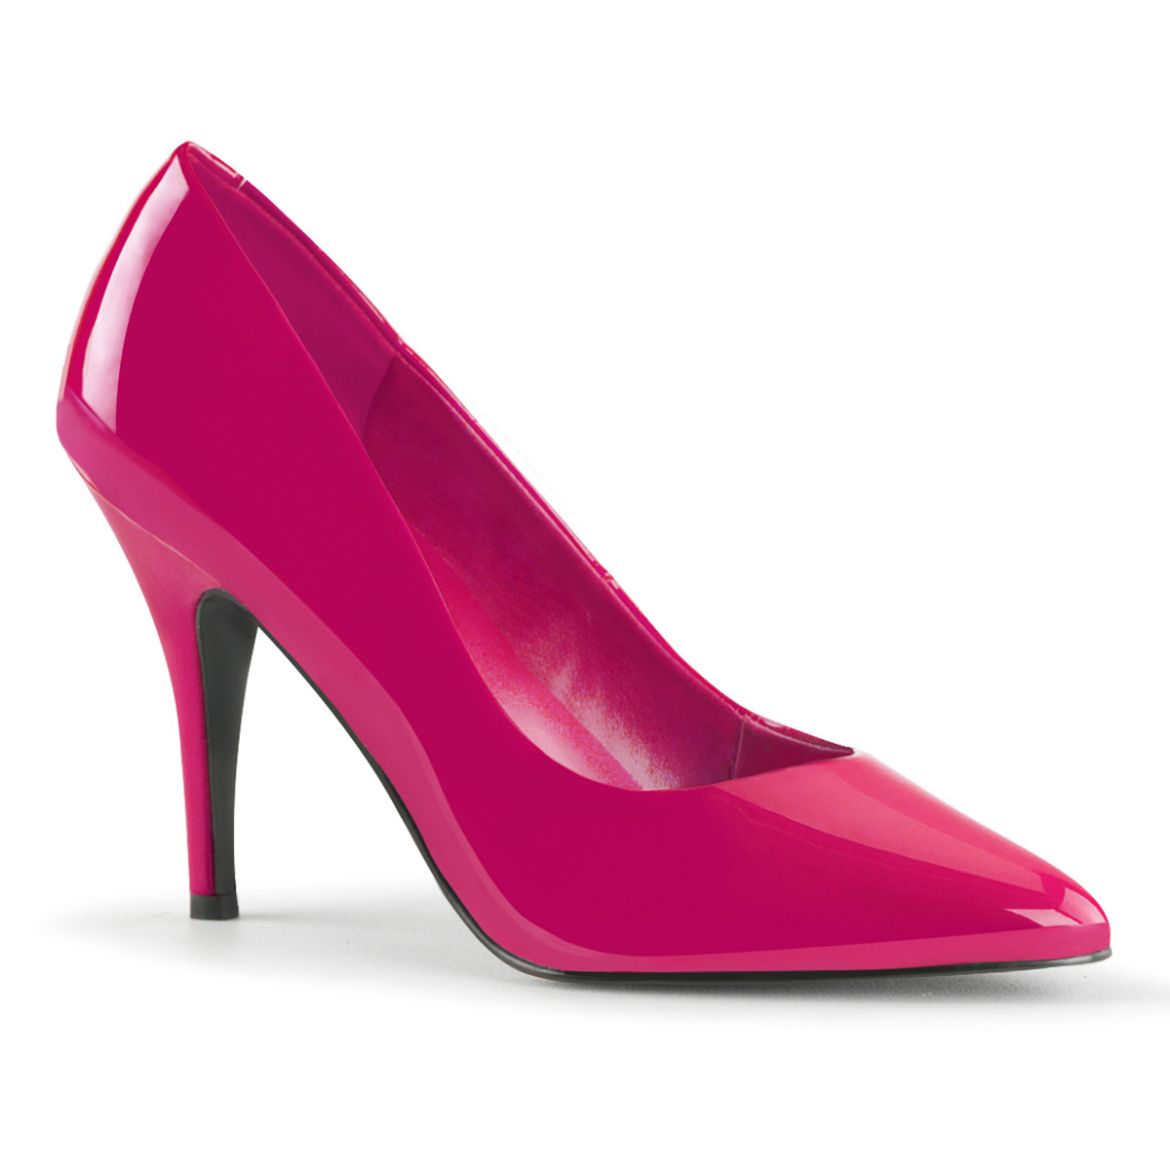 Product image of Pleaser VANITY-420 Hot Pink Patent 4 inch (10.1 cm) Heel Classic Pump Court Pump Shoes